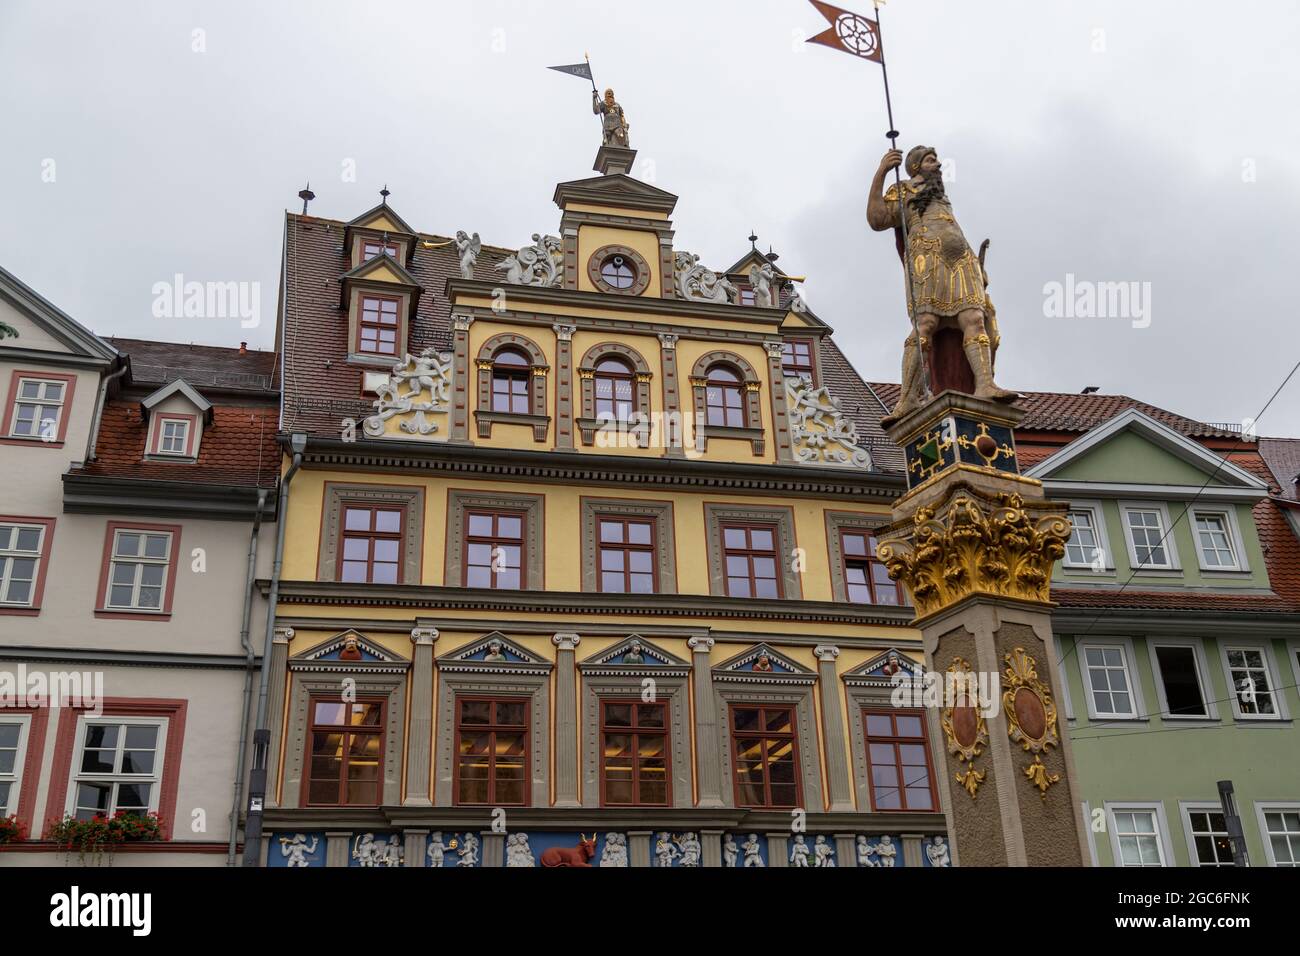 Sculpture of a warrior in front of a historic building on the fish market in Erfurt, thuringia Stock Photo